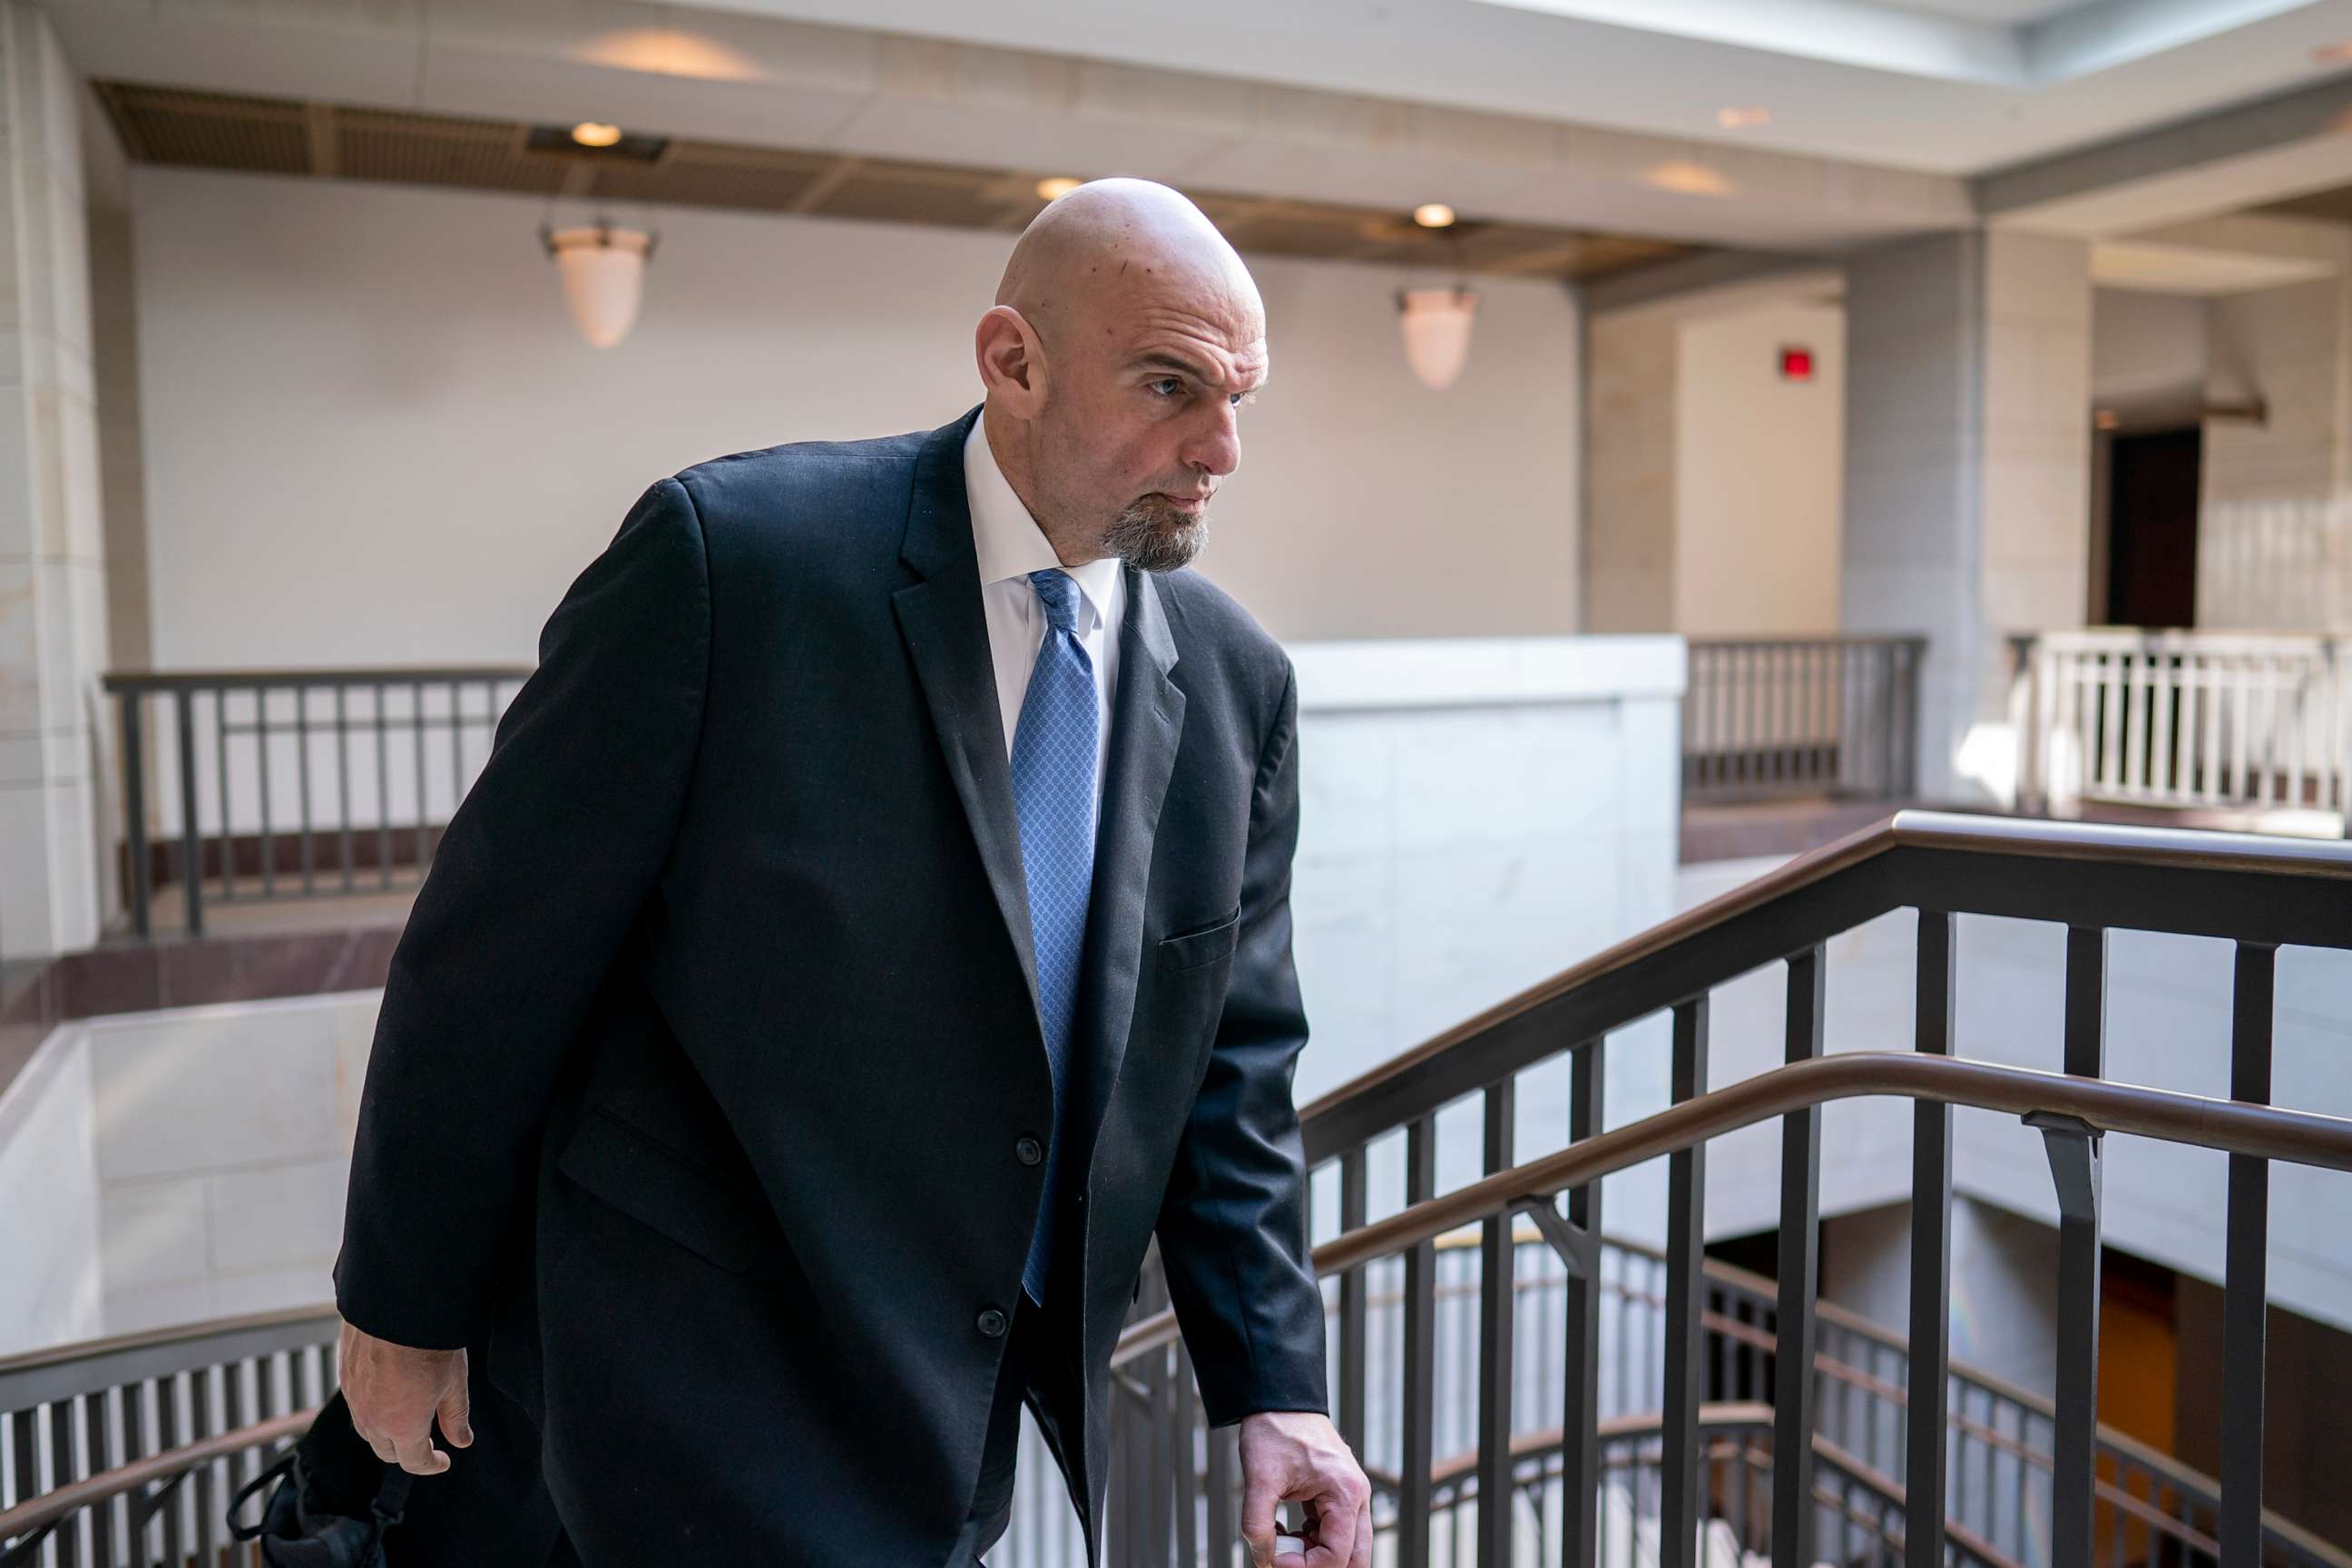 PHOTO: Sen. John Fetterman leaves an intelligence briefing on the unknown aerial objects, at the Capitol in Washington, Feb. 14, 2023.